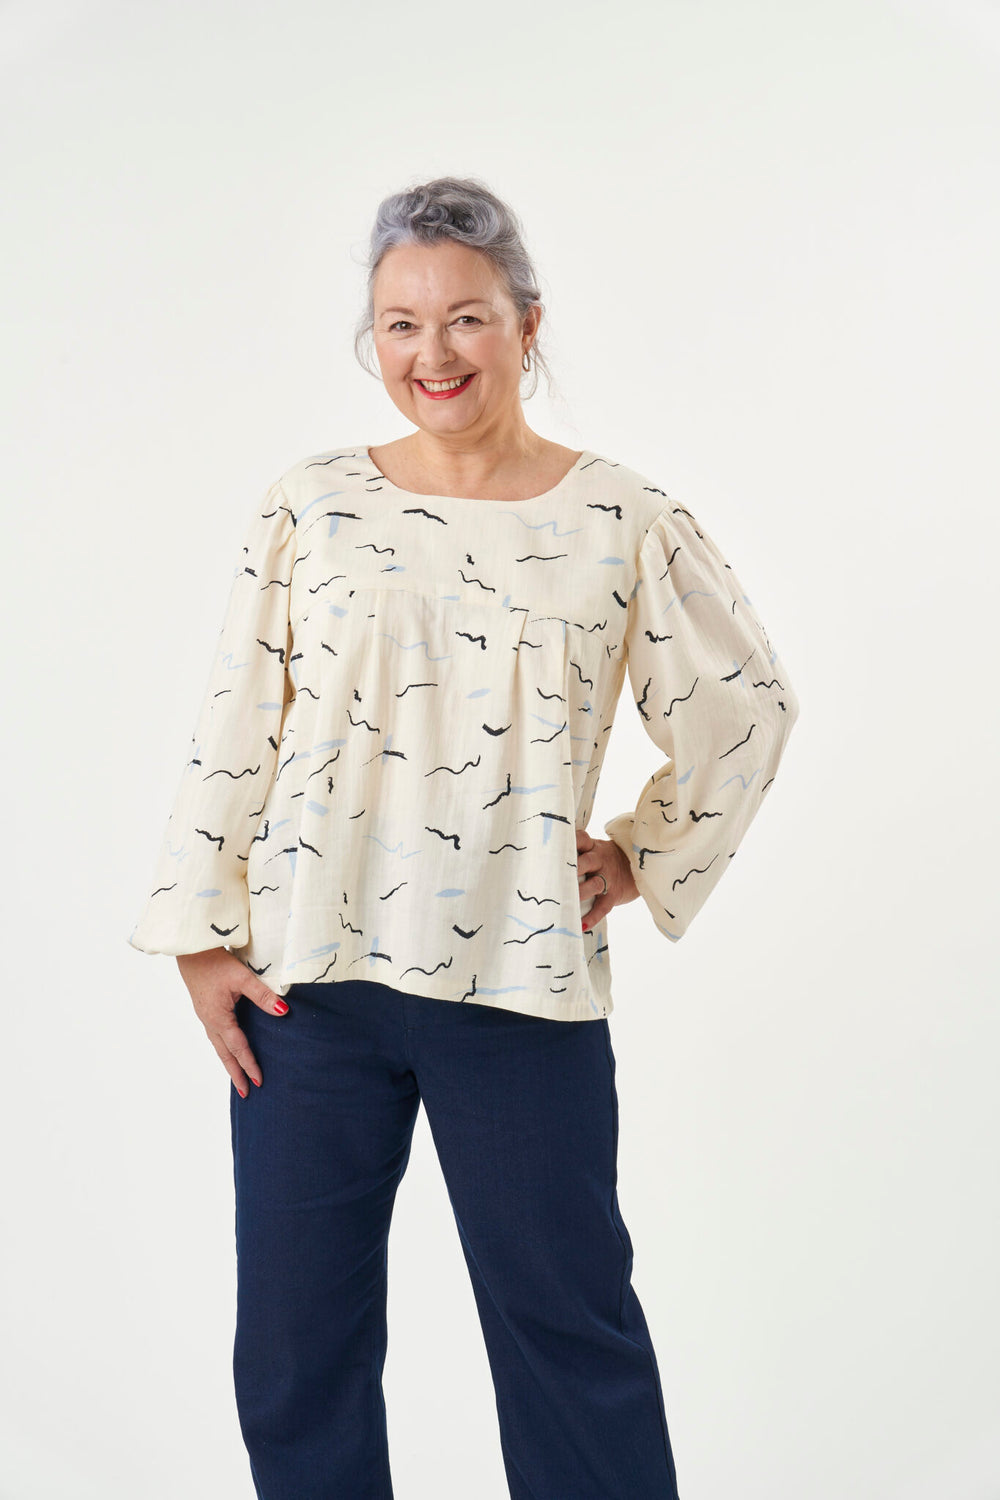 Woman wearing the Frida Blouse sewing pattern from Sew Over It on The Fold Line. A blouse pattern made in rayon/viscose, double gauze, broderie anglaise, crepe, Tencel, voile, lawn or Swiss dot fabrics, featuring a front and back yoke with pleats on both 